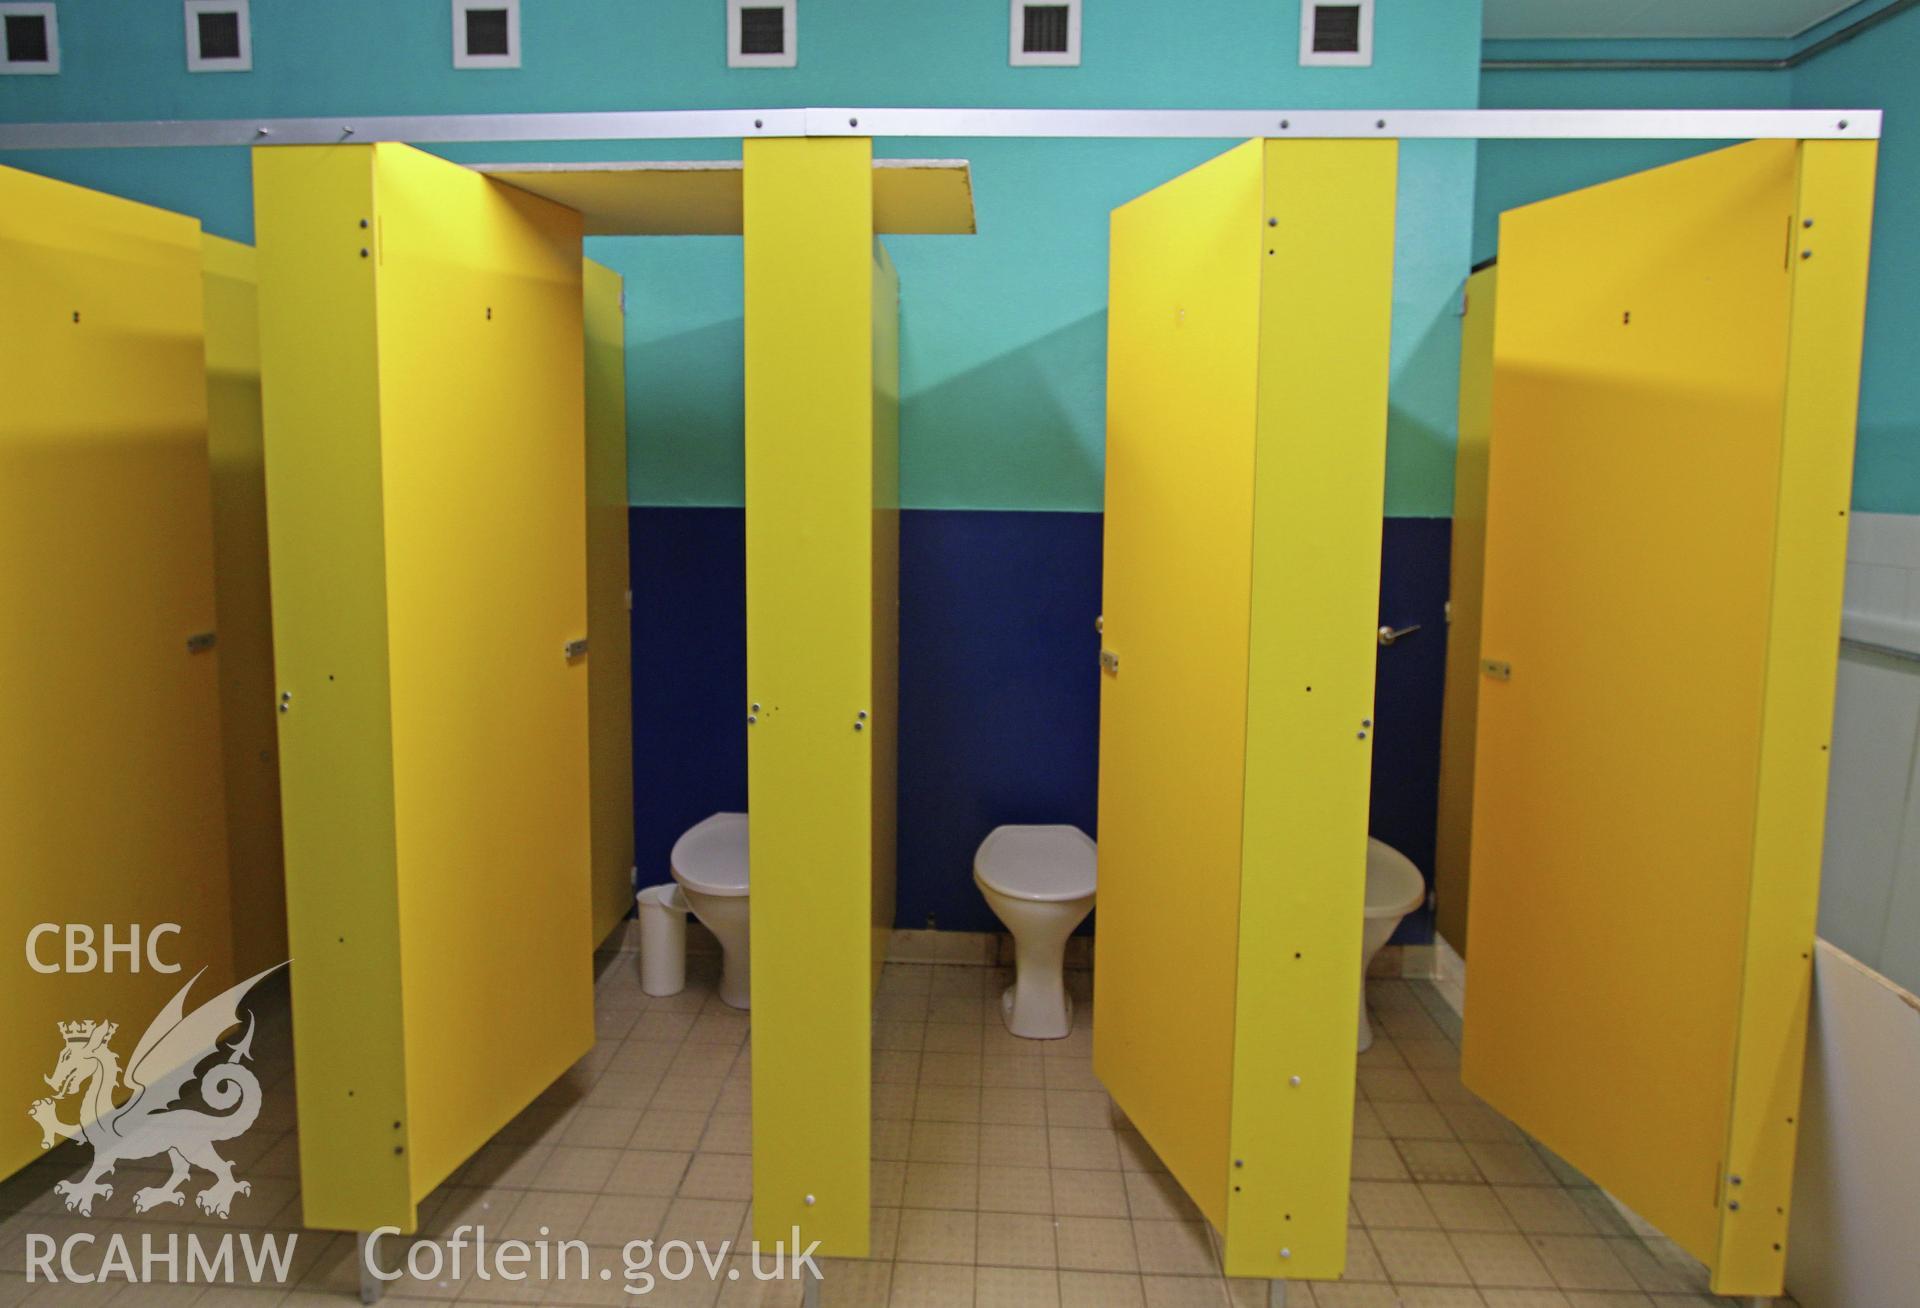 The changing rooms at Rhyl Sun Centre, taken by Sue Fielding, 27th May 2016.